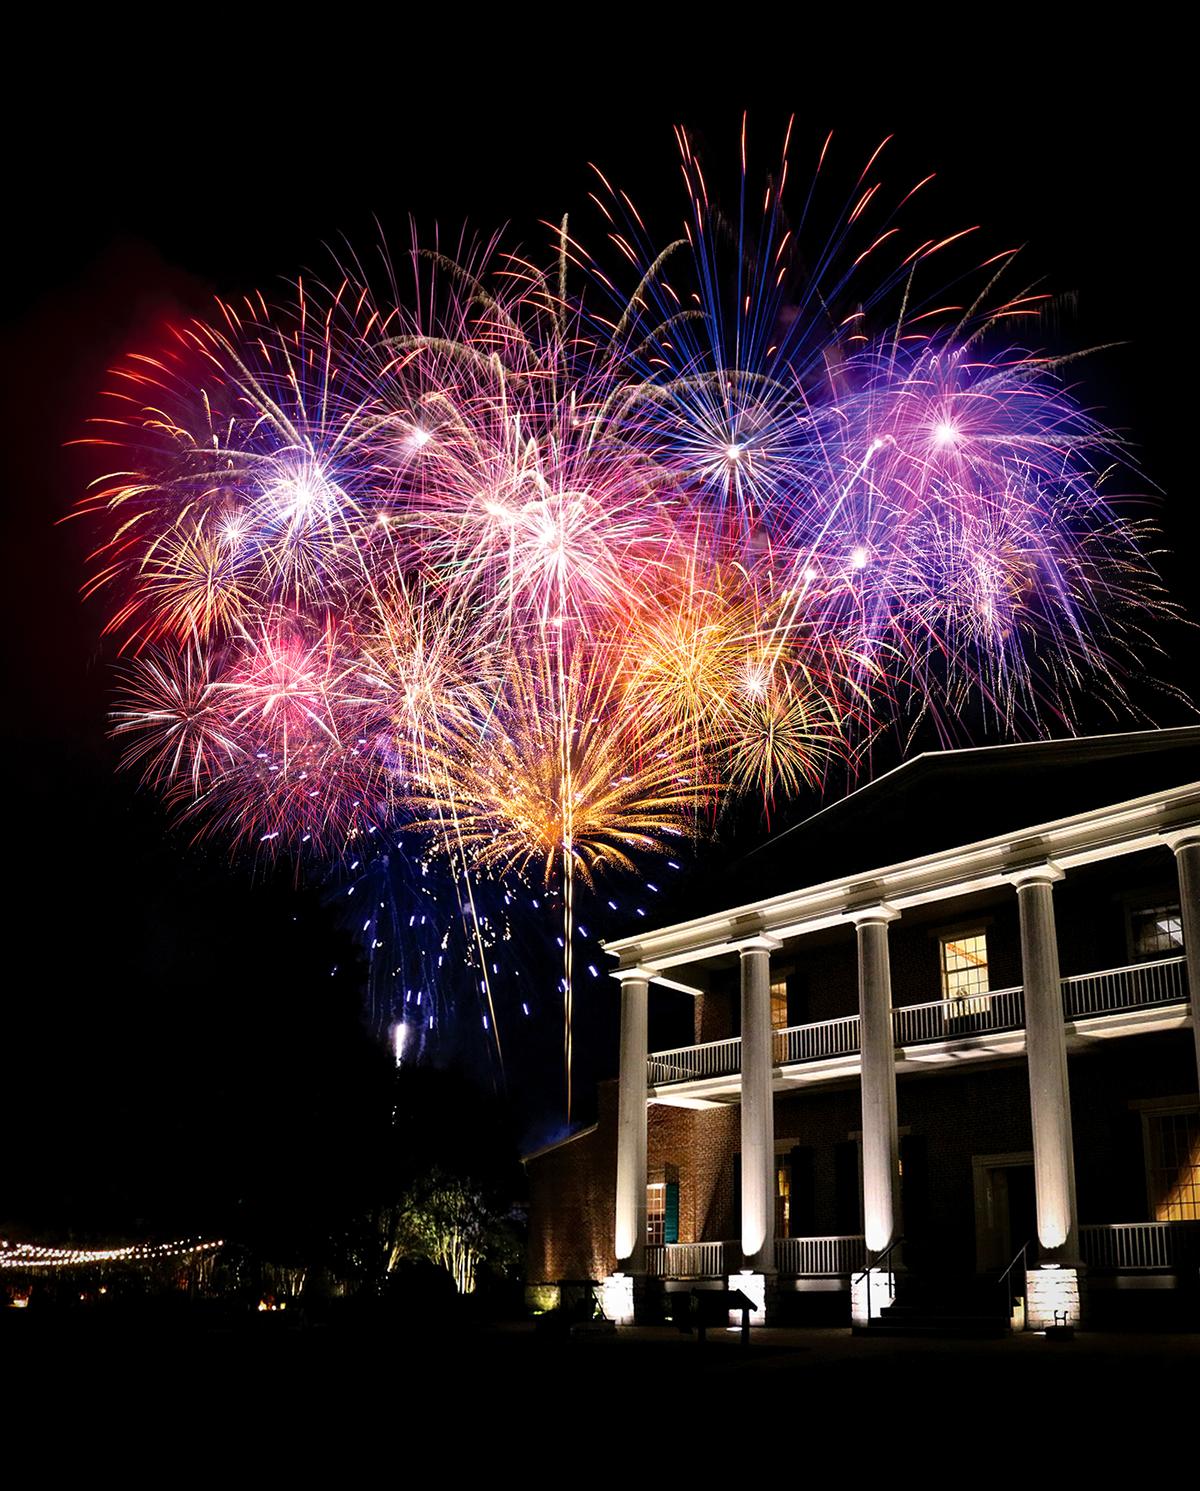 Fireworks at Jackson's Hermitage on July 4. (Courtesy of The Hermitage)